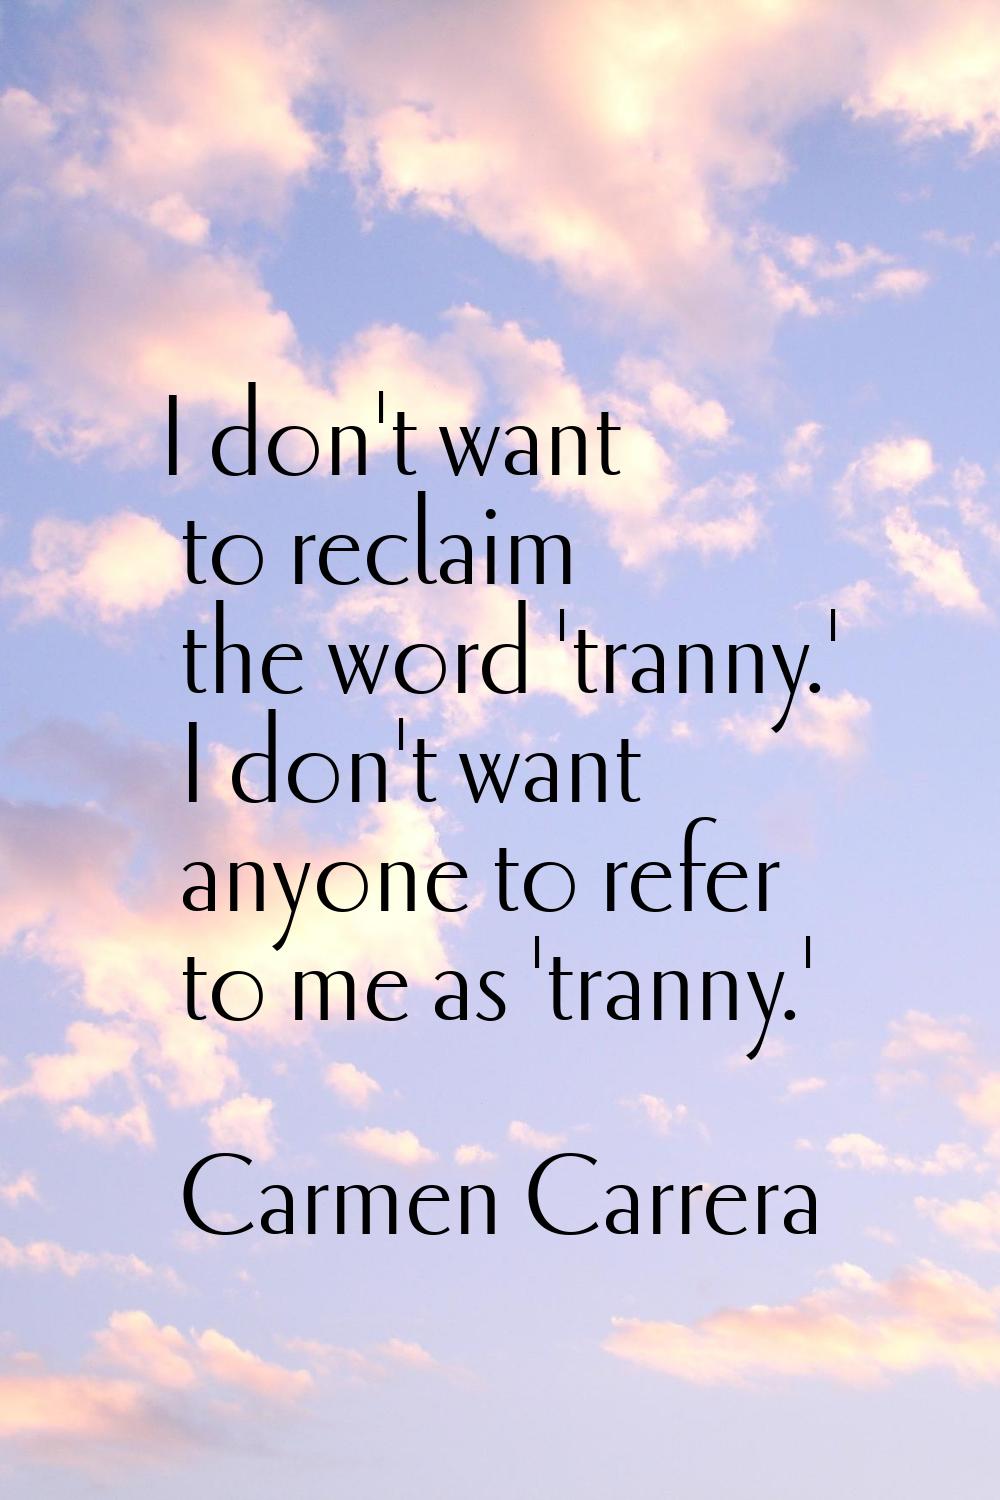 I don't want to reclaim the word 'tranny.' I don't want anyone to refer to me as 'tranny.'